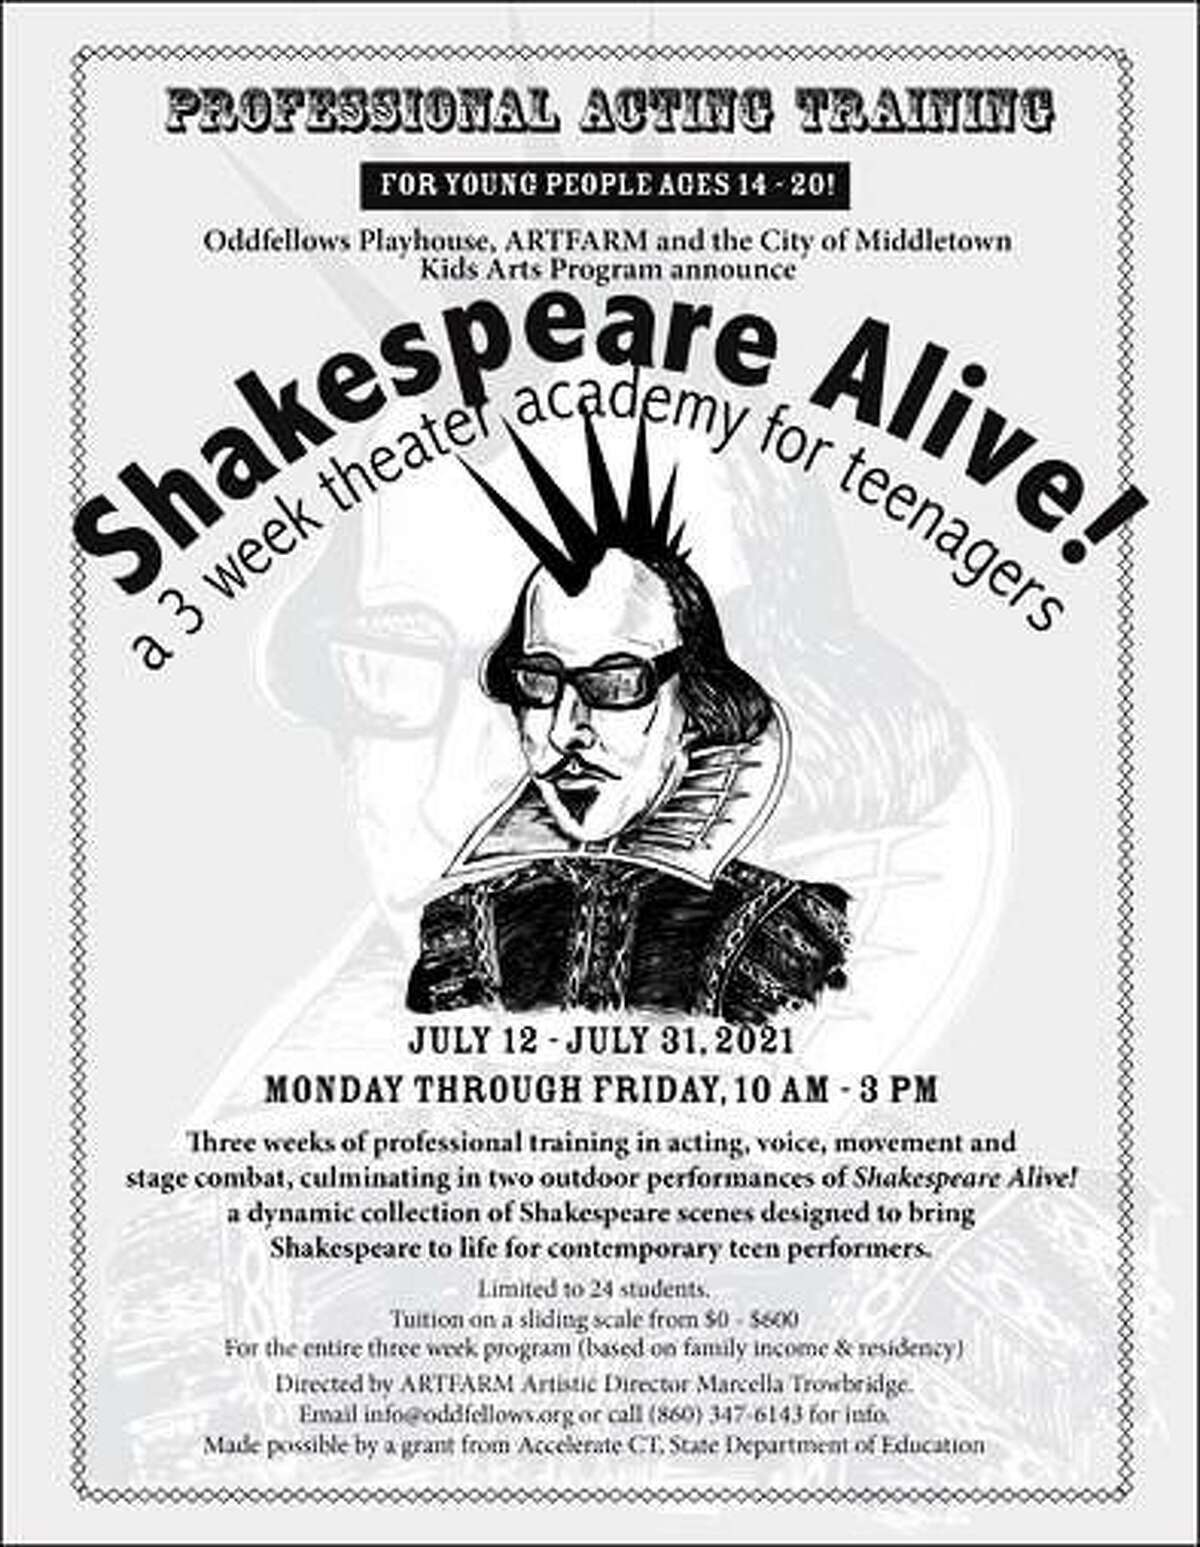 The poster for Oddfellows Playhouse Youth Theater and Artfarm’s “Shakespeare Alive!” is shown.